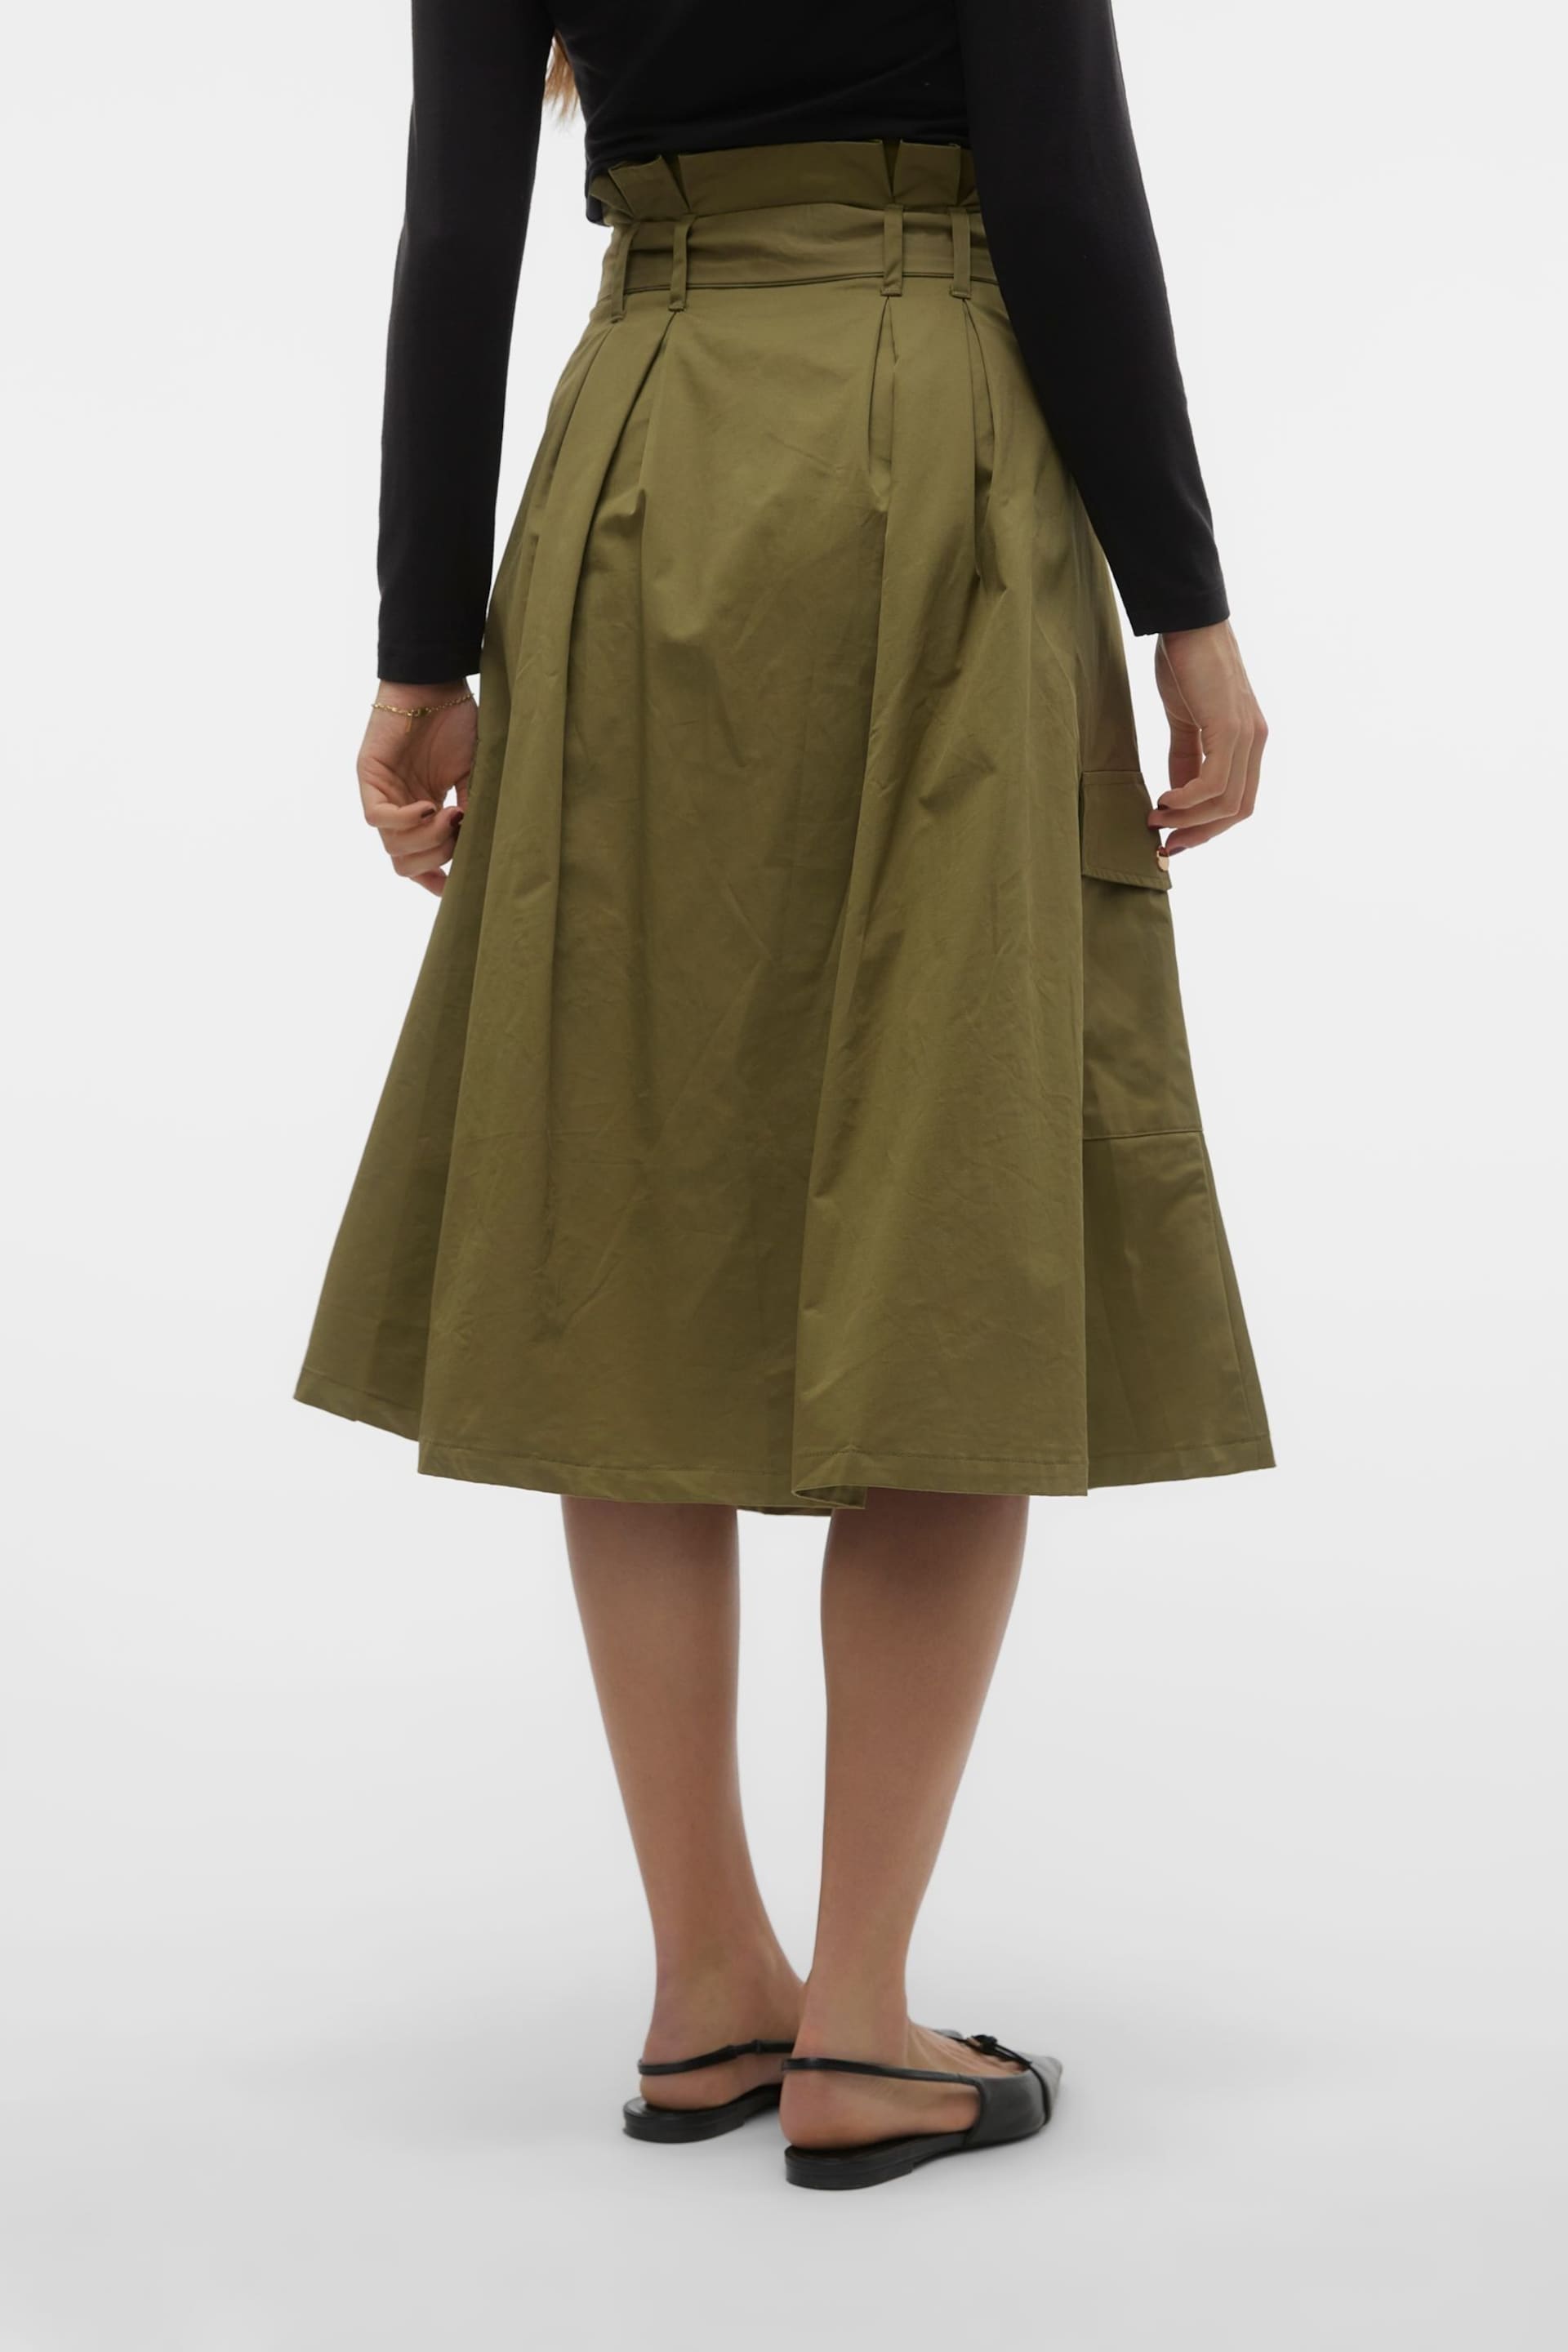 VERO MODA Green Belted A-Line Cargo Utility Midi Skirt - Image 2 of 4